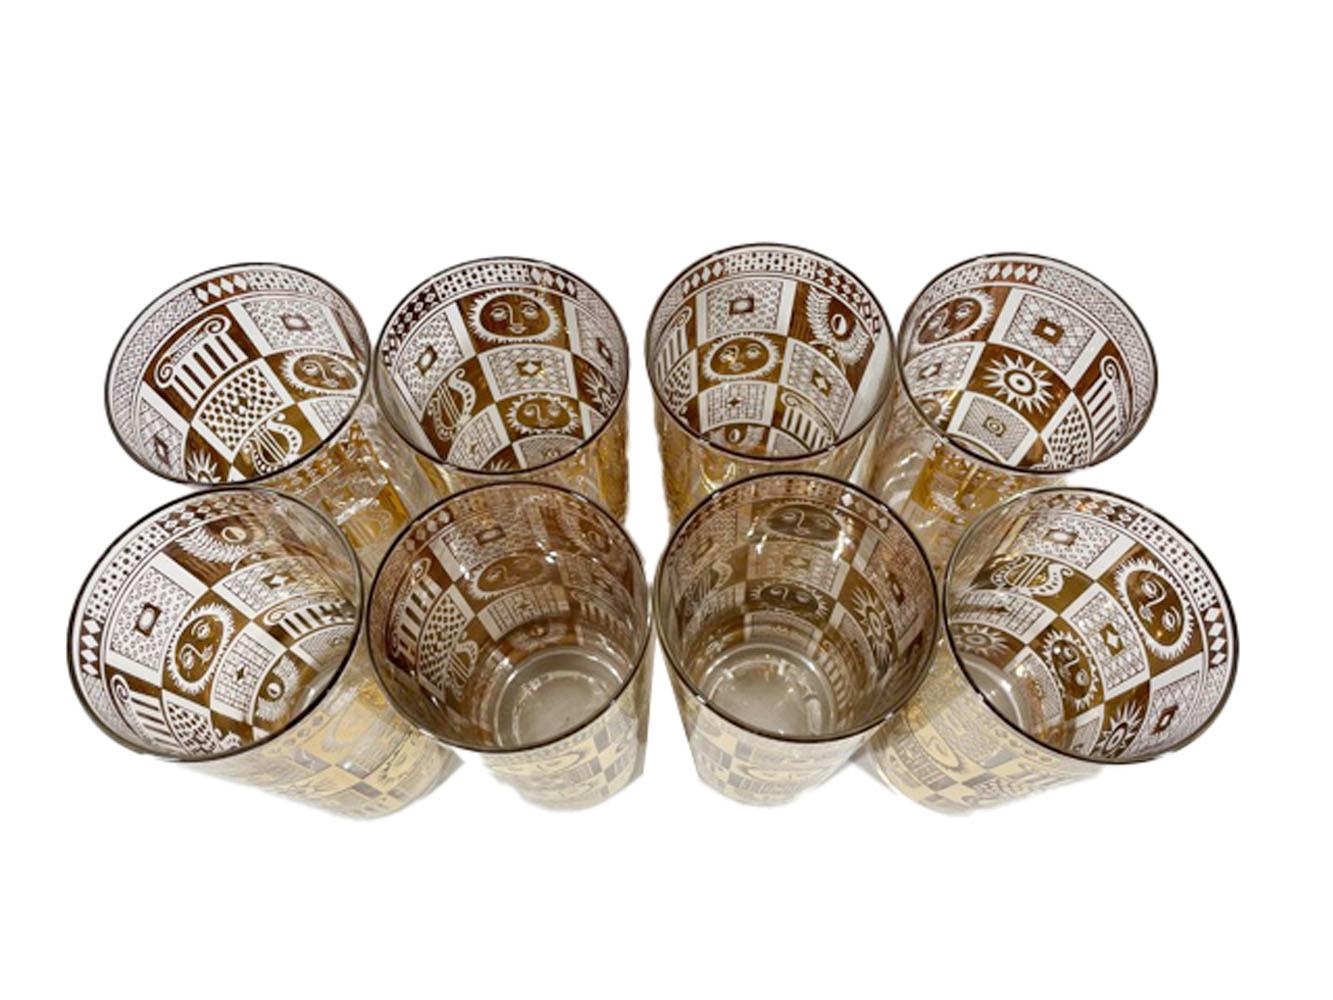 Eight mid-century highball glasses designed by Georges Briard in the Golden Celeste pattern having a checkerboard pattern in 22 karat gold on clear glass and each square containing classical motifs including suns with faces, column capitals and